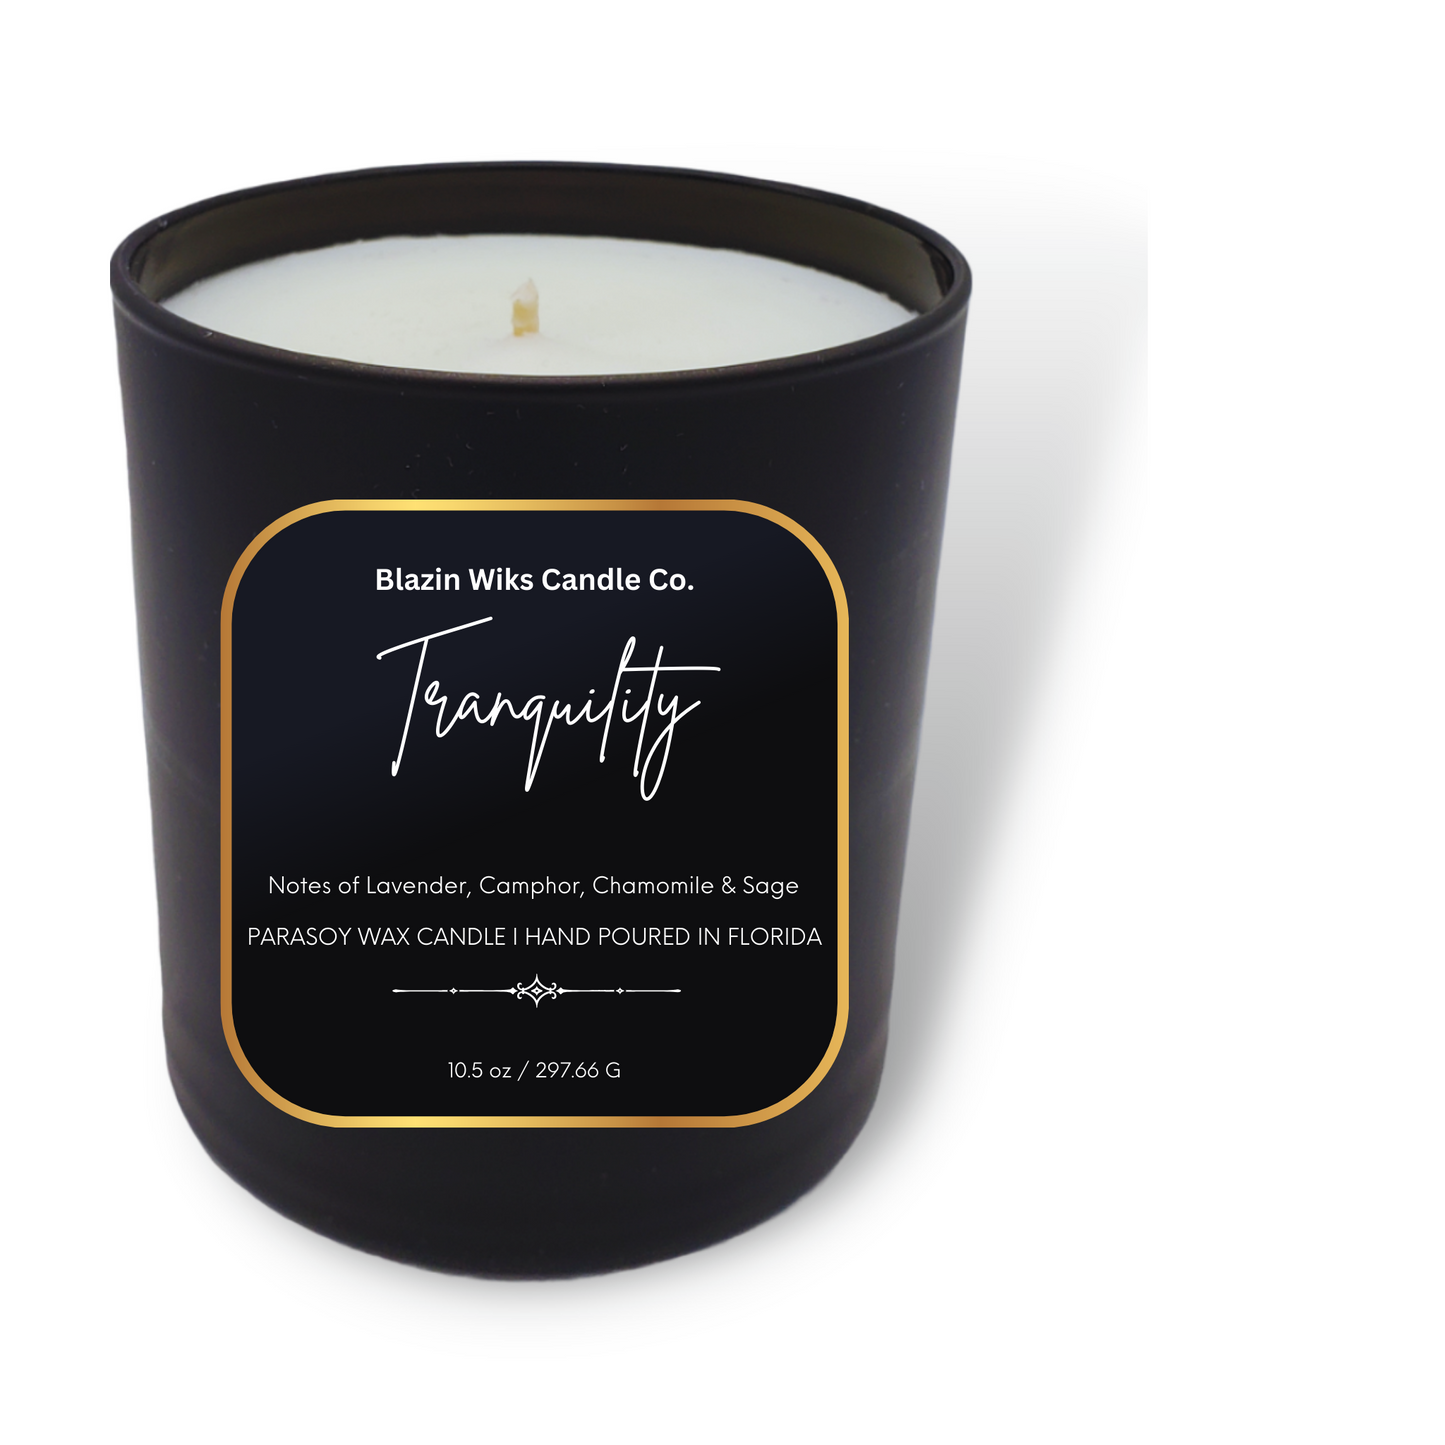 Tranquility Candle from Blazin Wiks Candle Co.